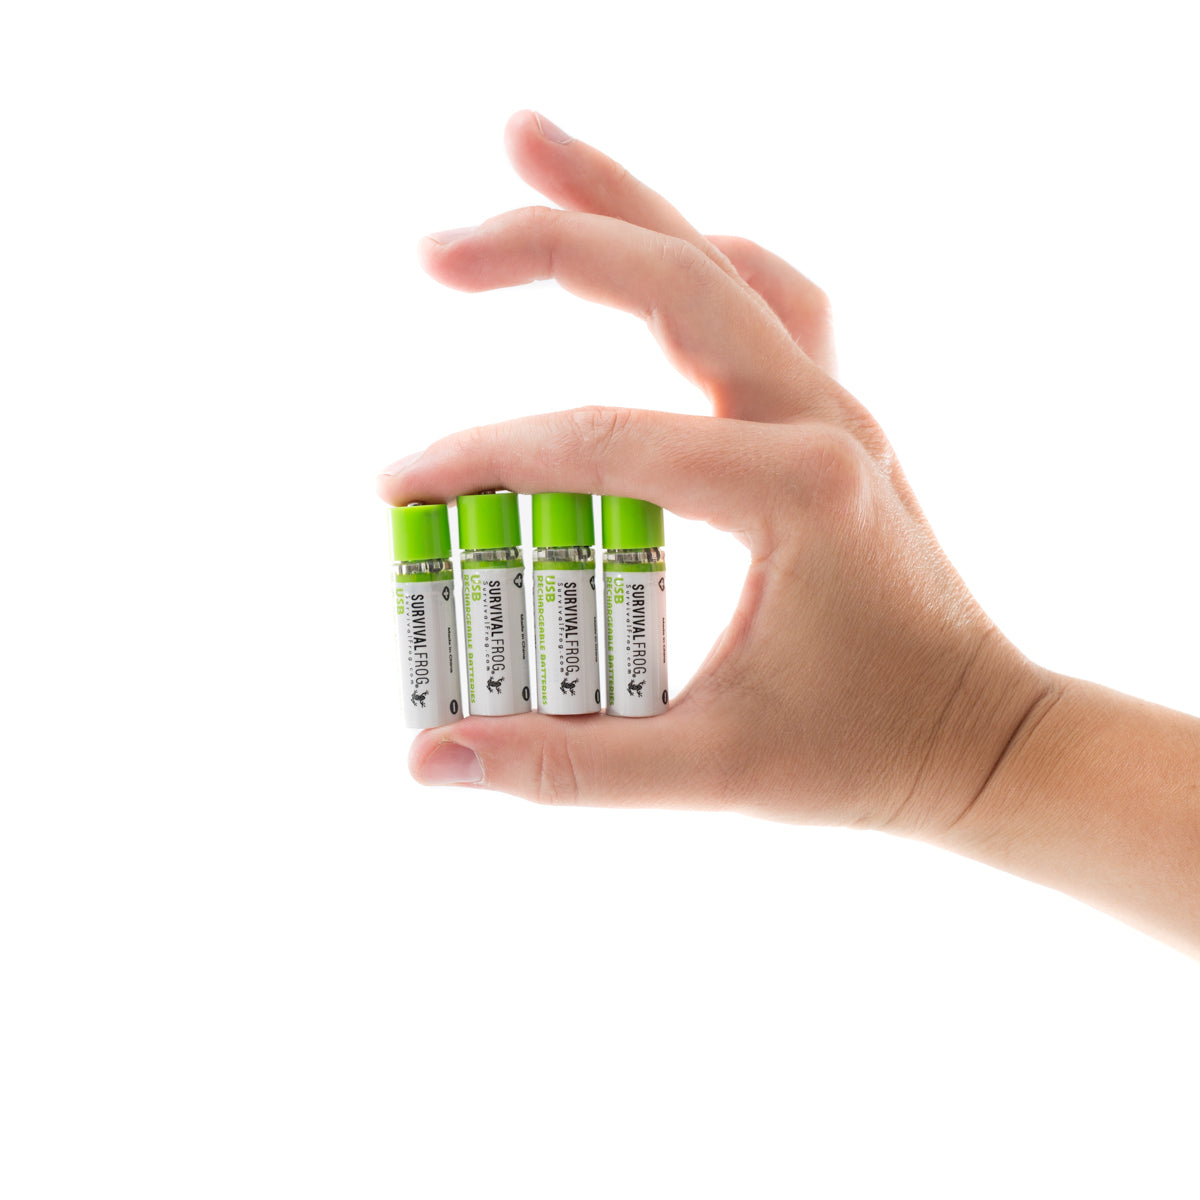 Four USB Rechargeable Batteries holding between 2 fingers